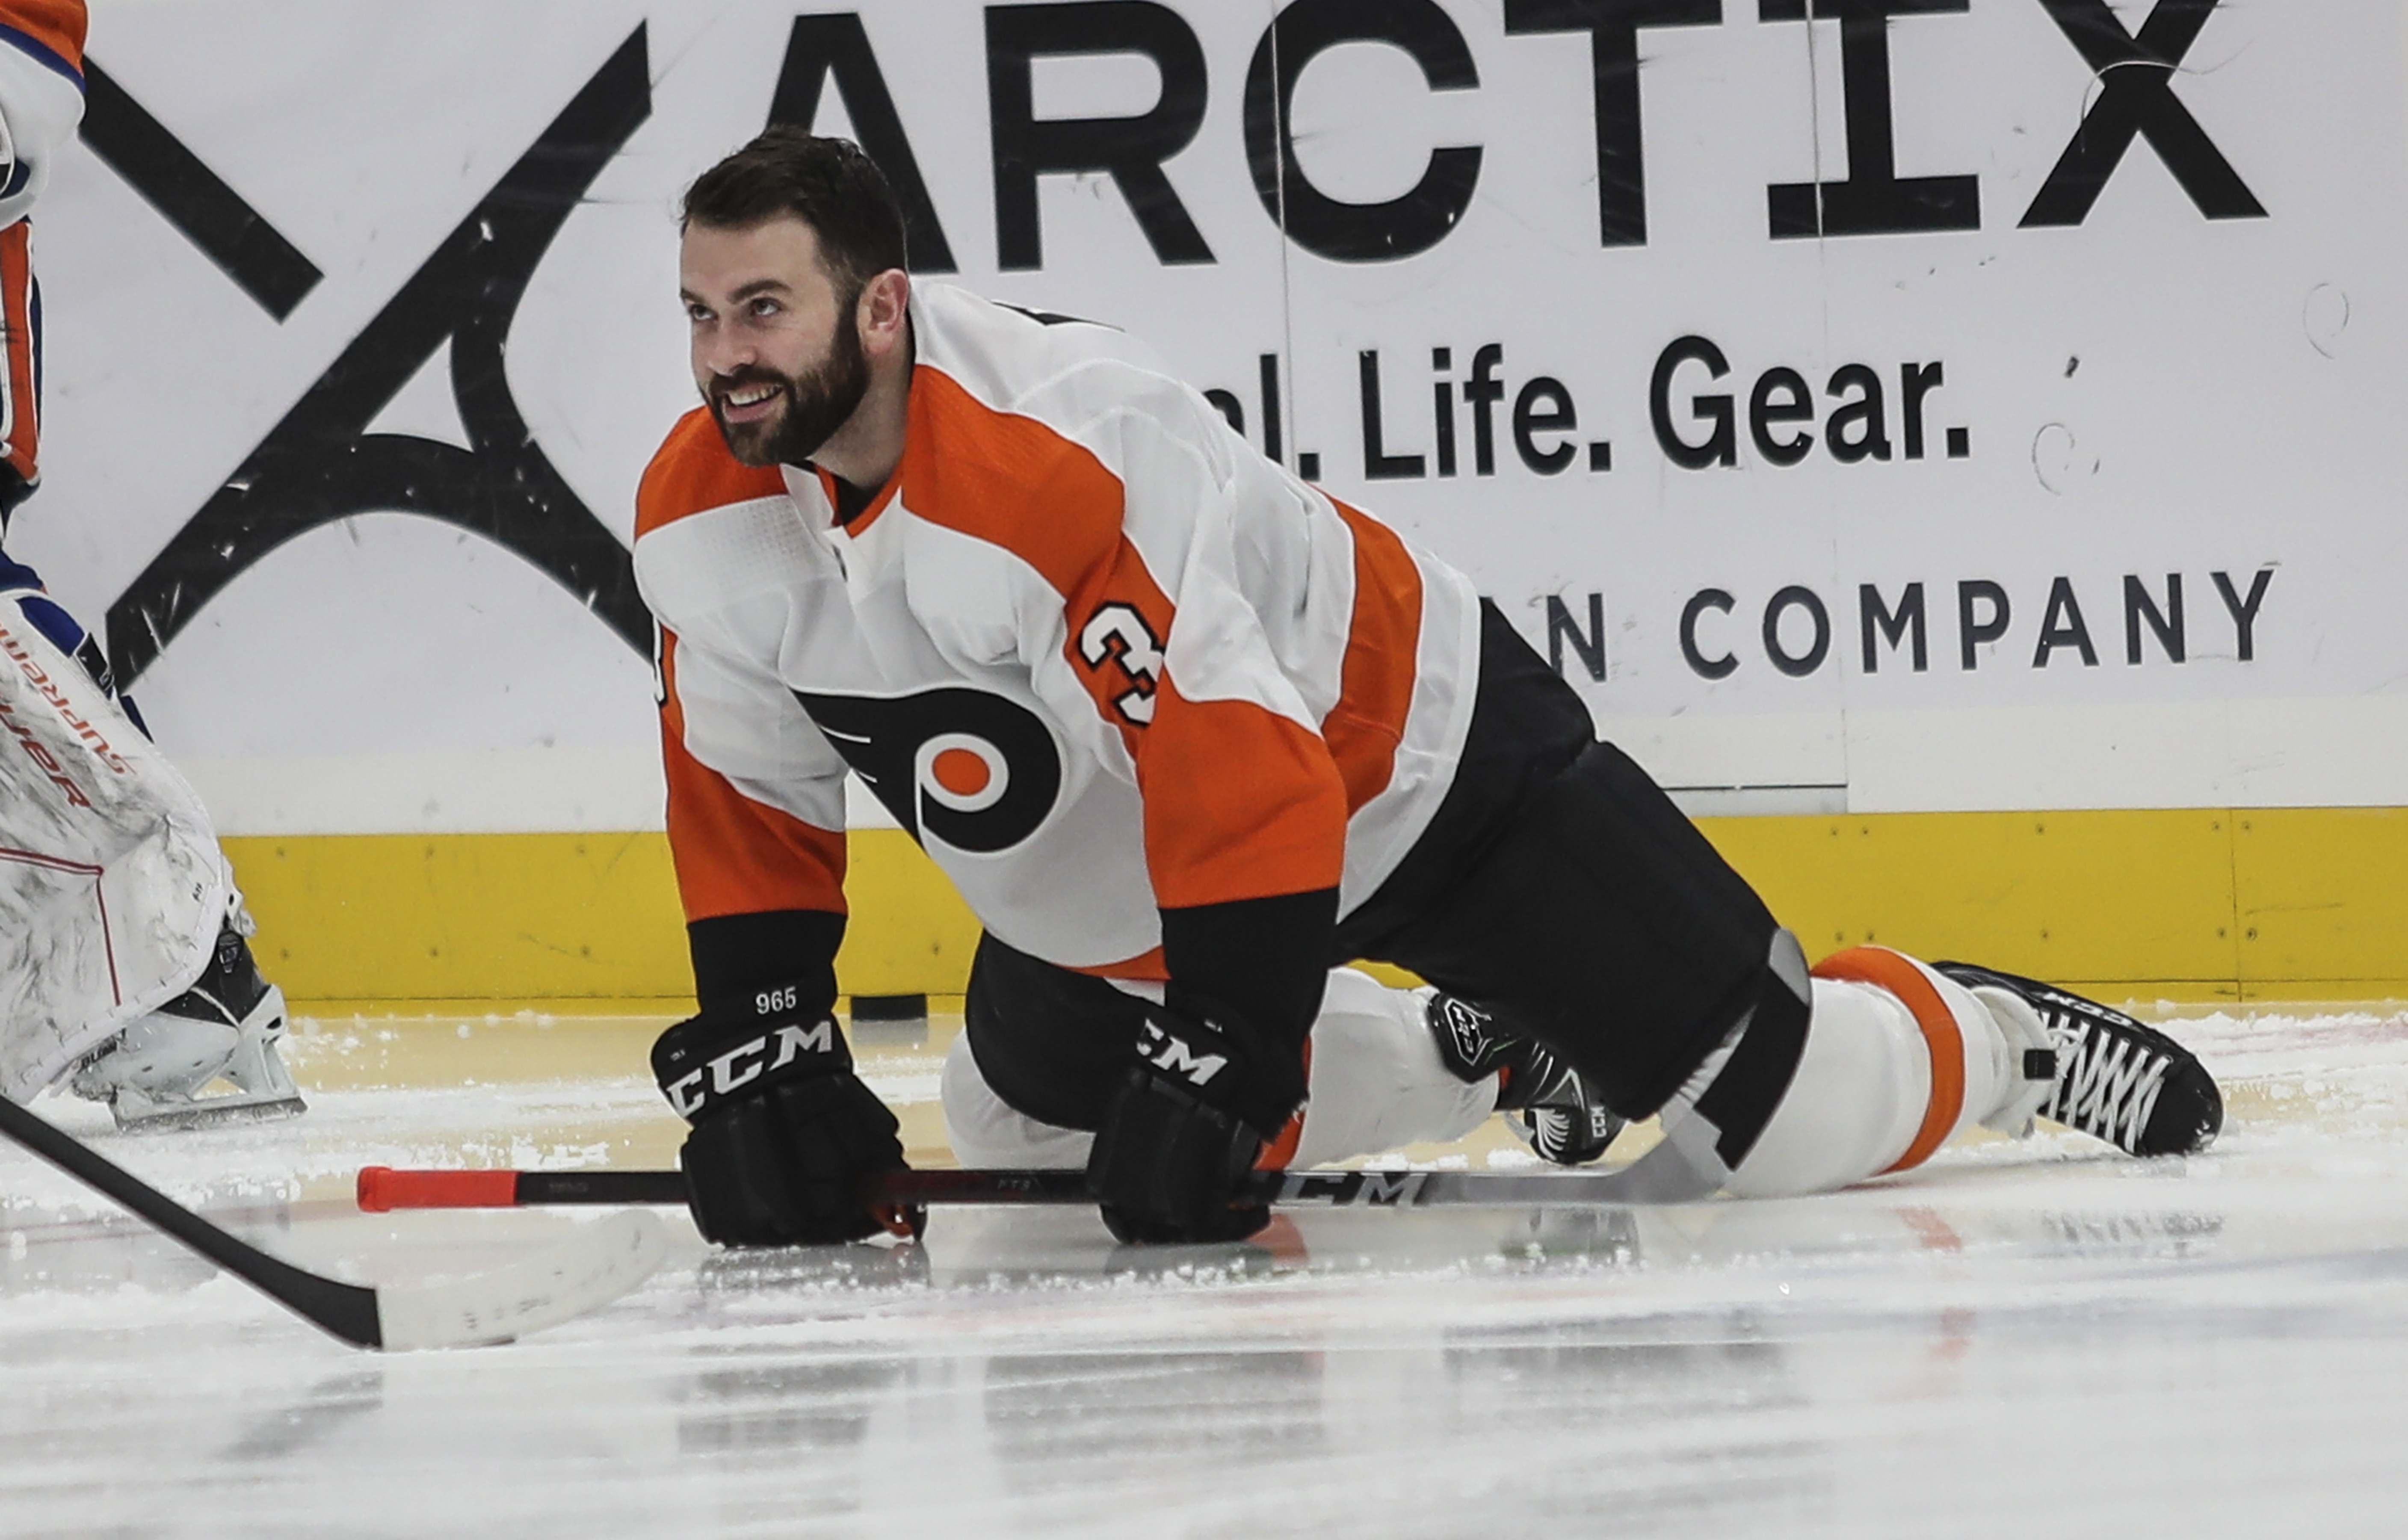 Flyers' Keith Yandle has played final game of memorable career